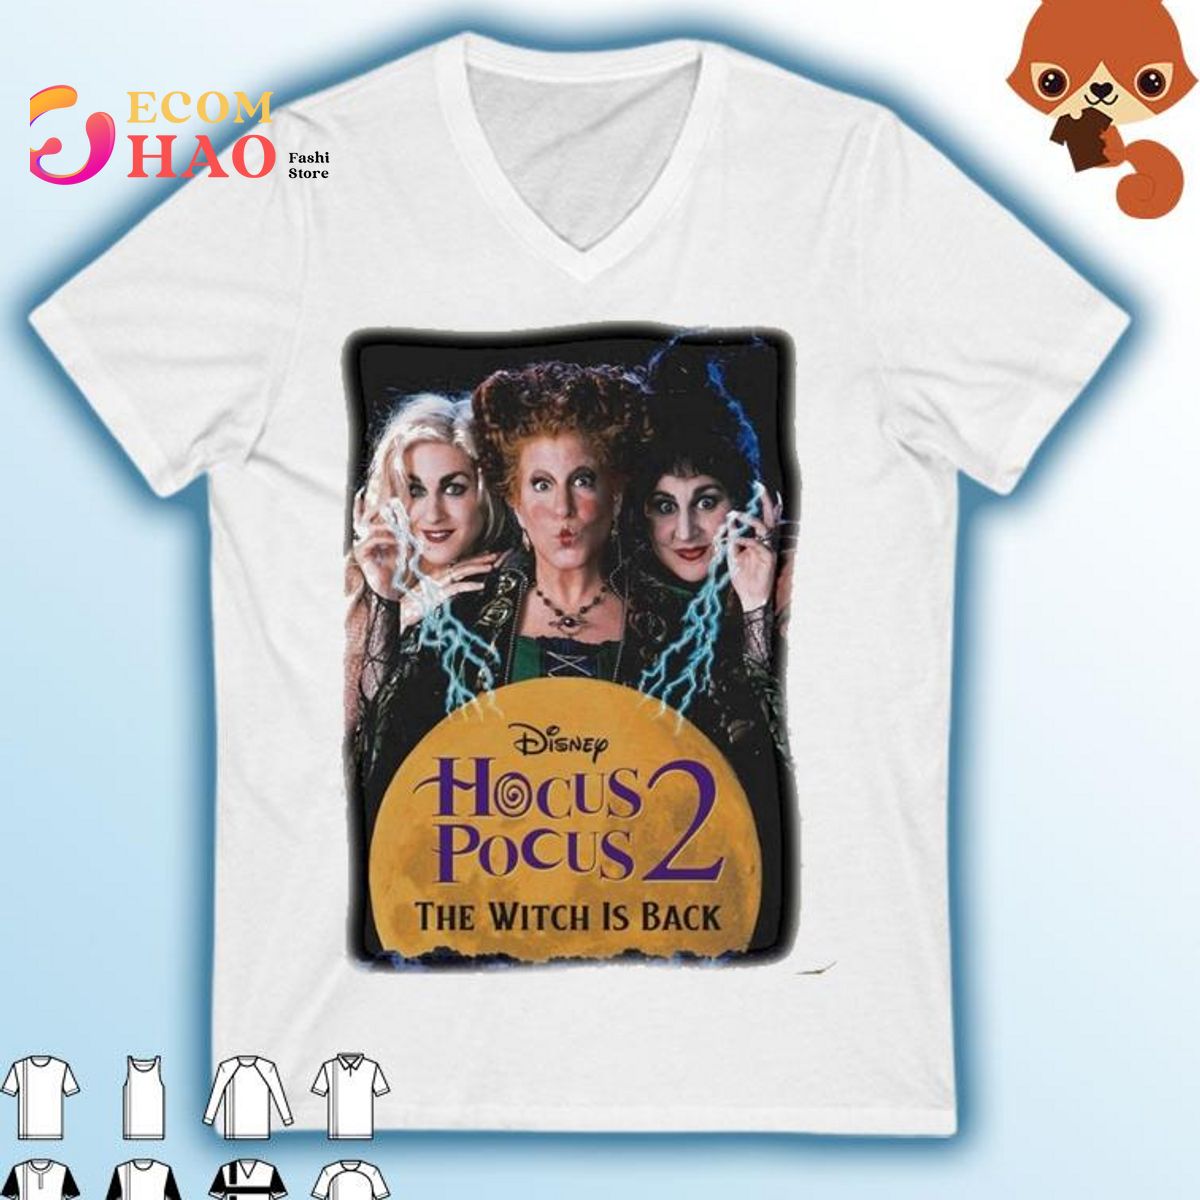 Disney Hocus Pocus 2 The Witch is Back Shirt